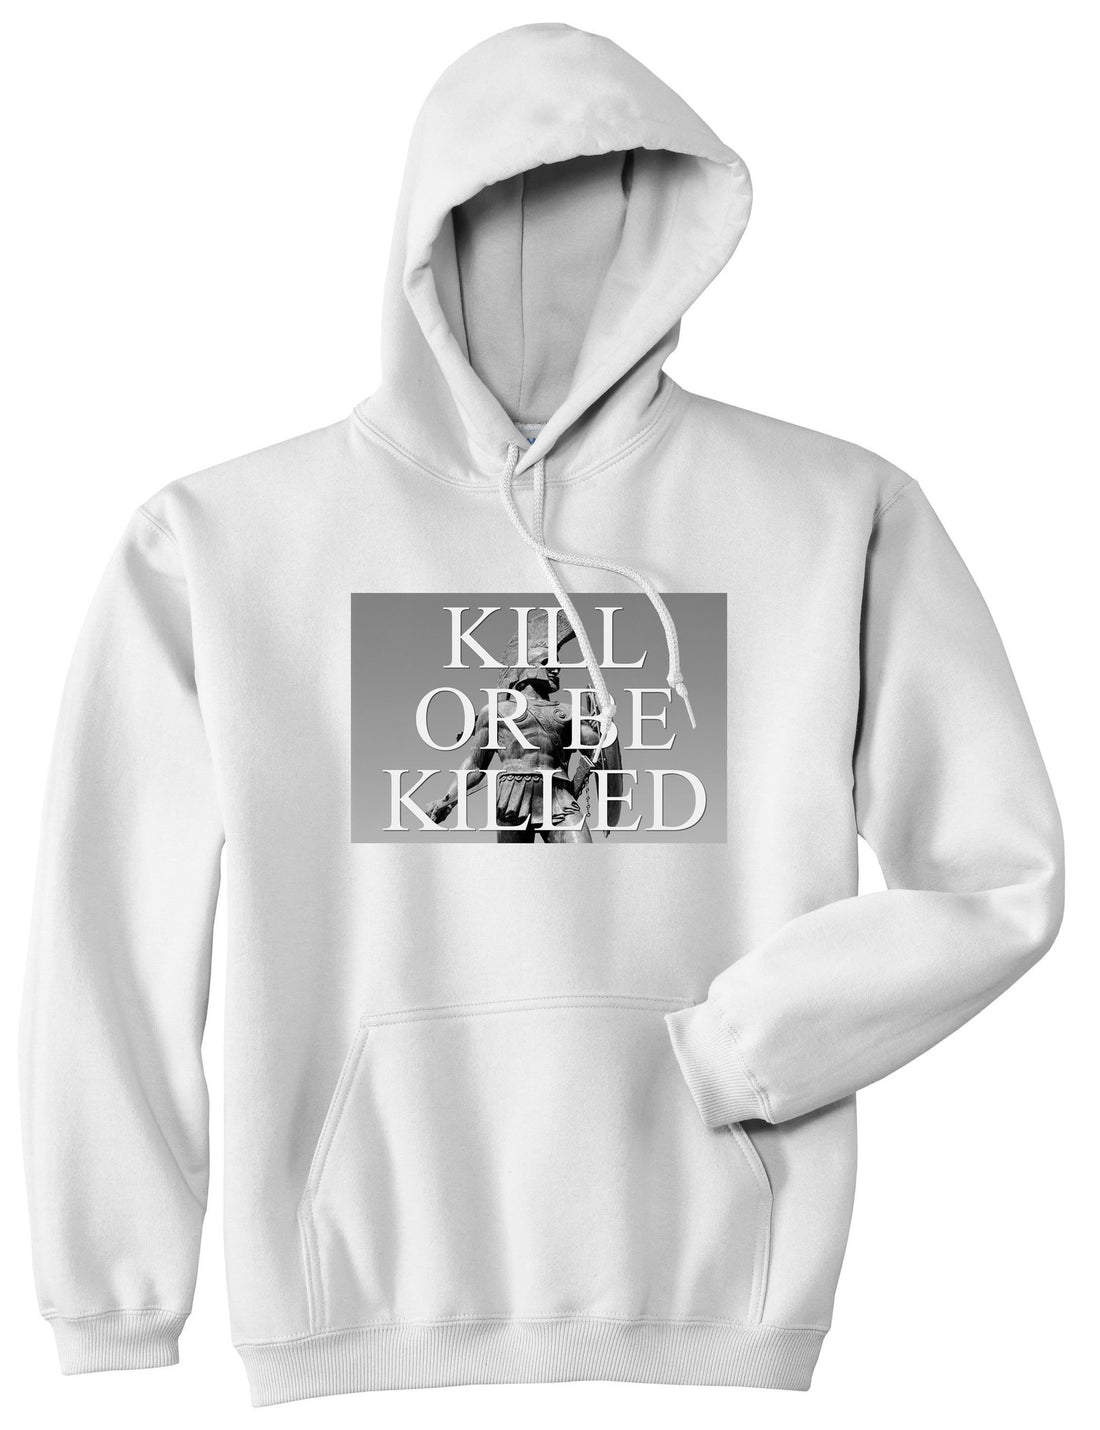 Kill Or Be Killed Boys Kids Pullover Hoodie Hoody in White by Kings Of NY